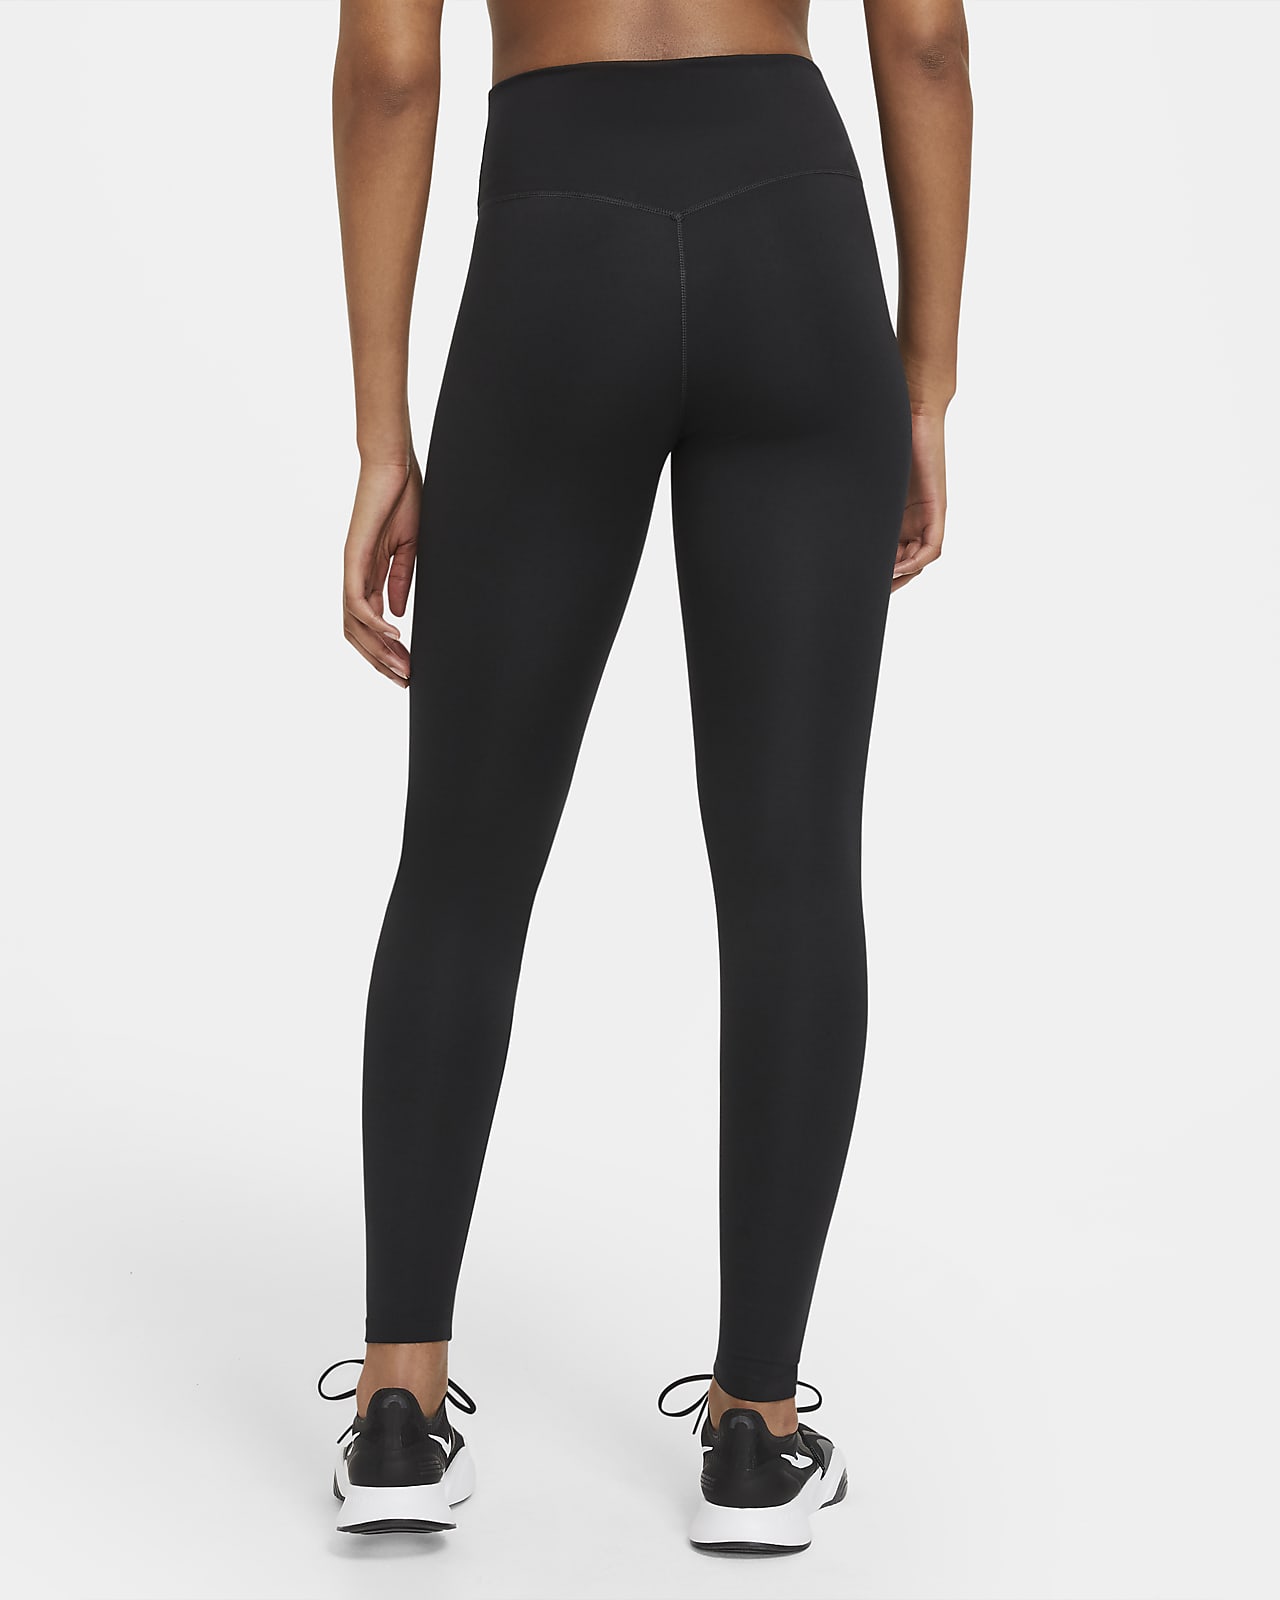 Legging taille mi-basse Nike One pour Femme. Nike CH